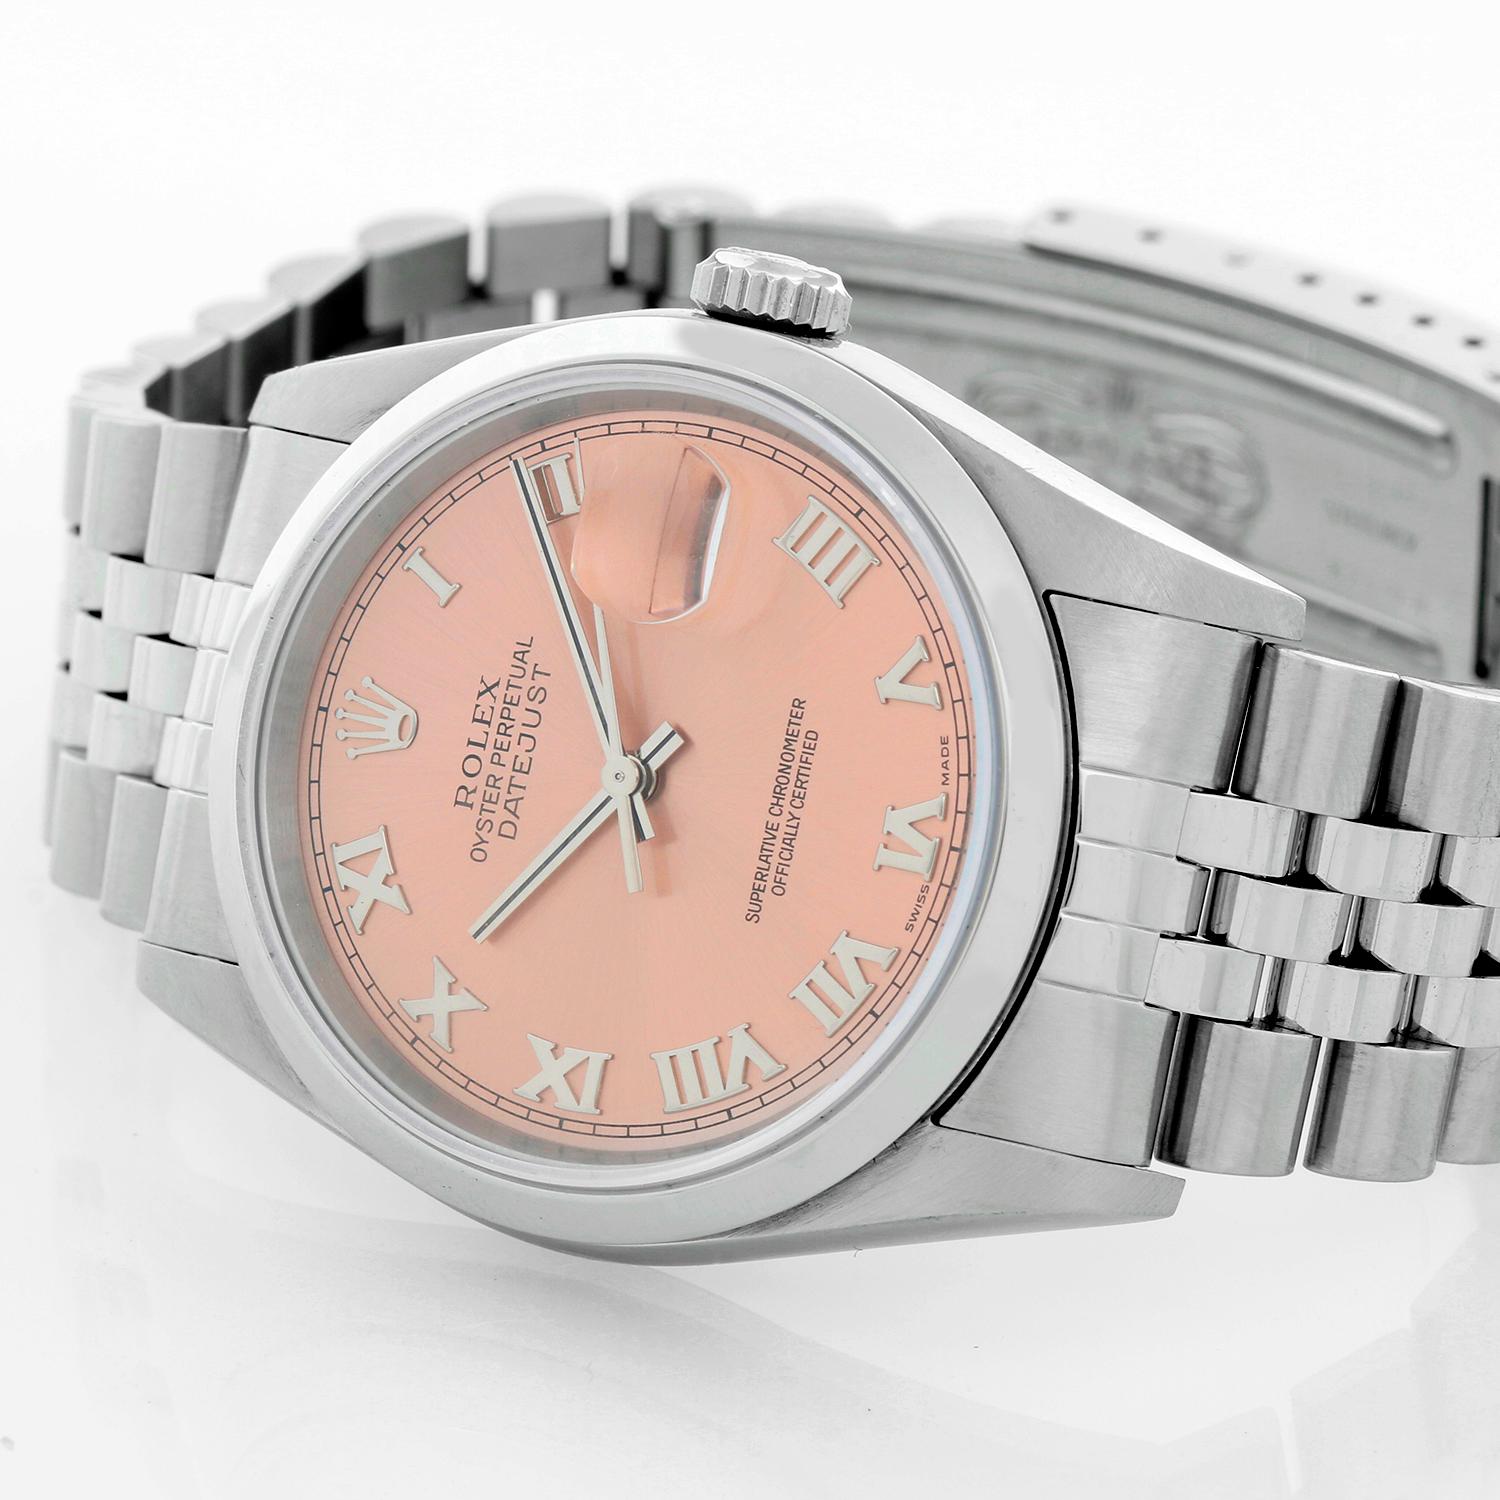 Rolex Datejust Men's Stainless Steel Automatic 16200 - Automatic winding. Stainless steel case with smooth bezel (36mm diameter). Salmon dial with Roman numerals; date at 3 o'clock. Stainless steel Jubilee bracelet. Pre-owned with custom box. 